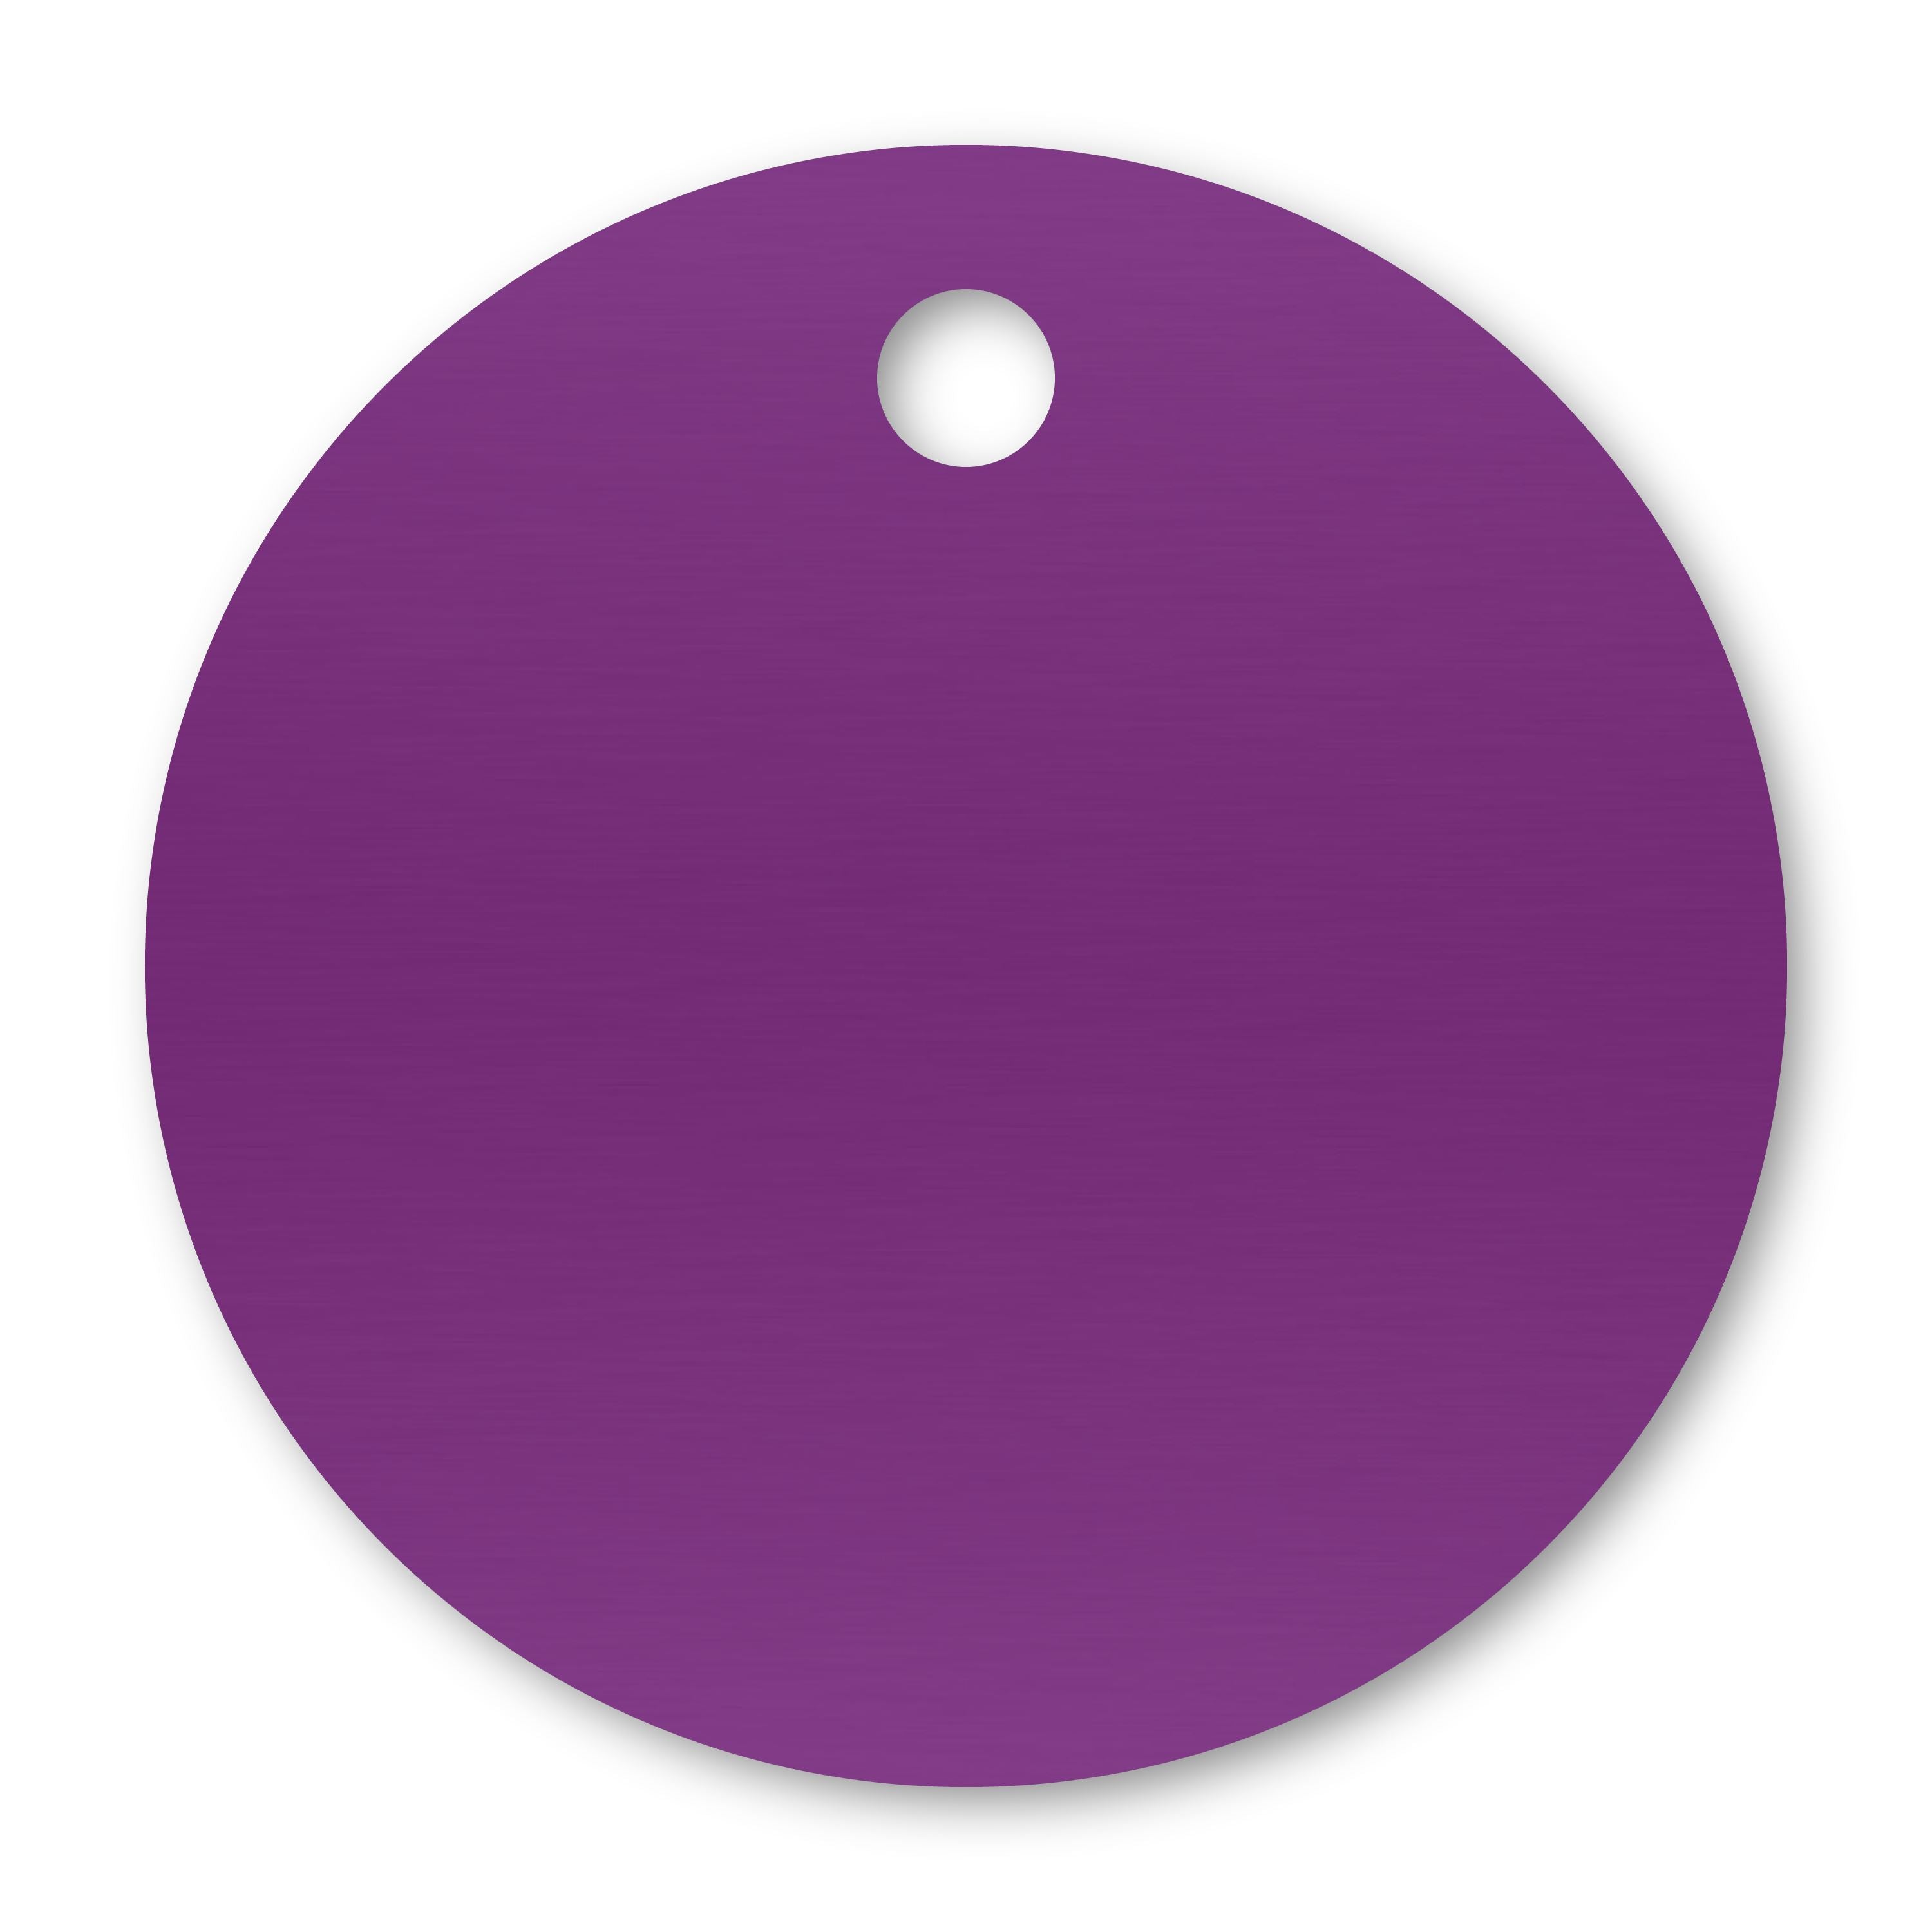 Anodized Aluminum Round Tags, 1-1/2" with 1/8" Hole, Laser Engraved Metal Tags Craftworks NW Purple 